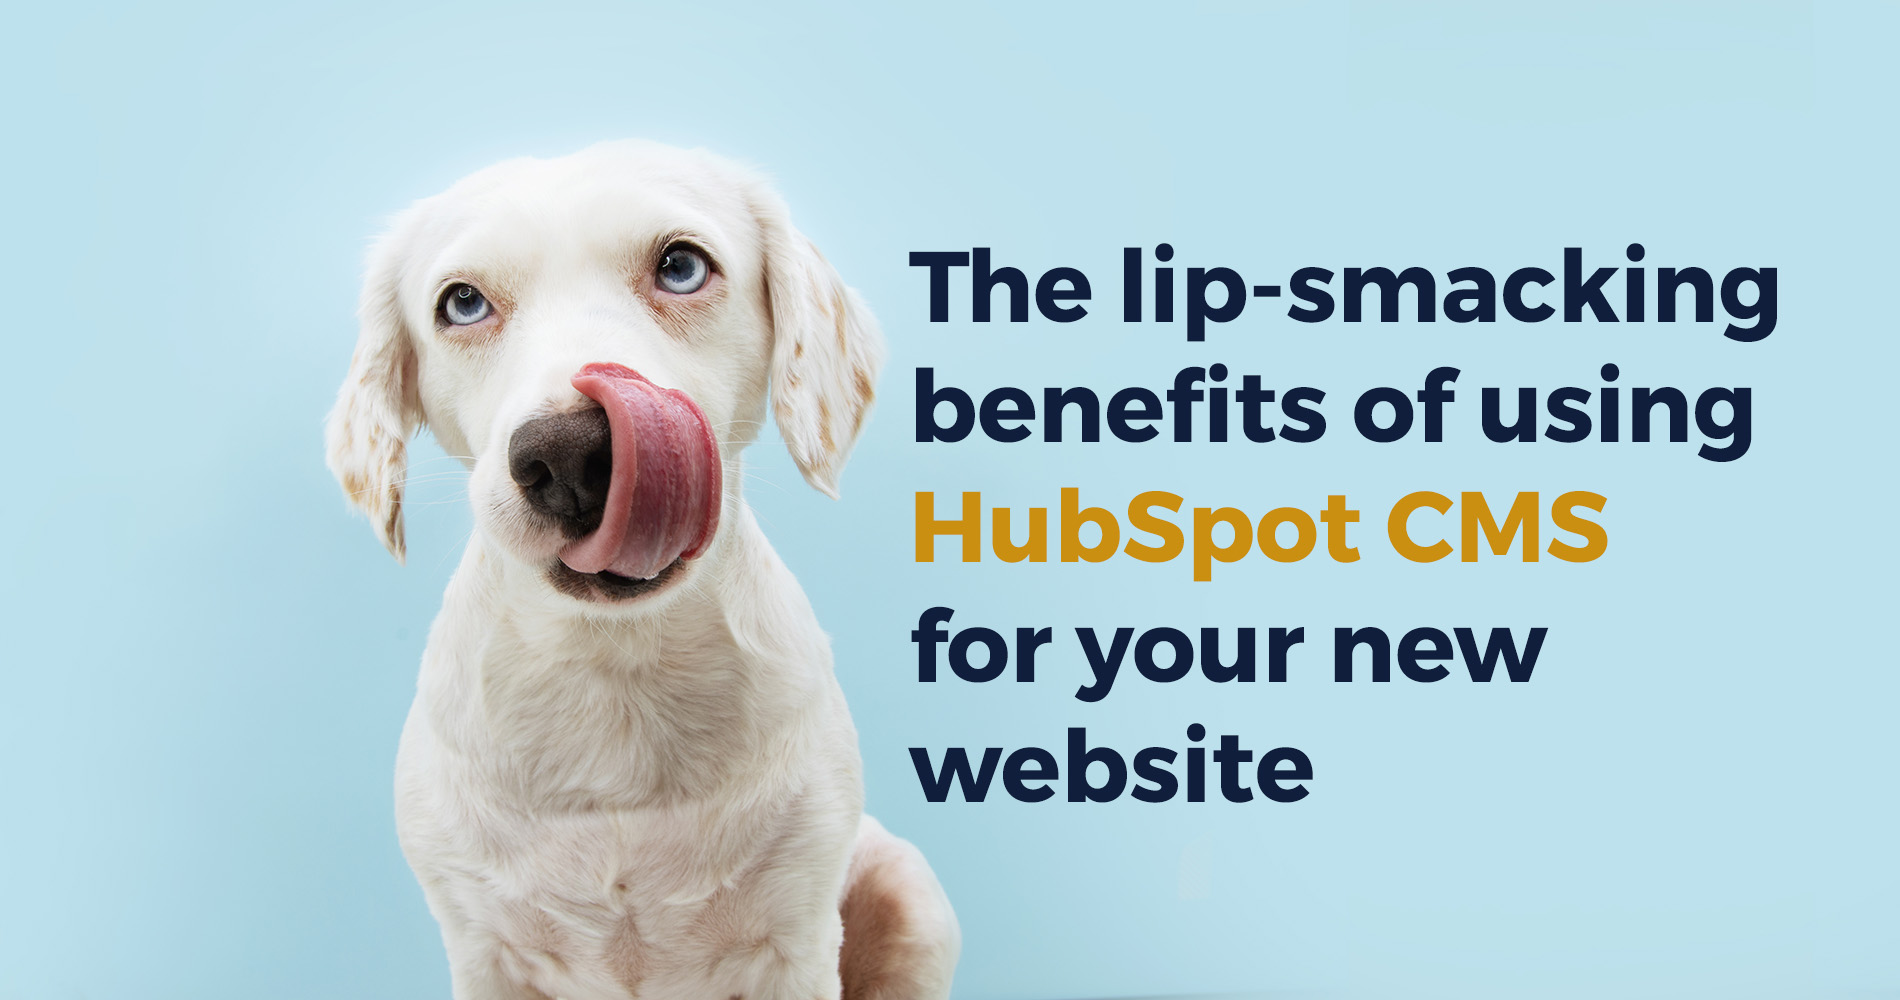 The lip-smacking benefits of using HubSpot CMS for your new website